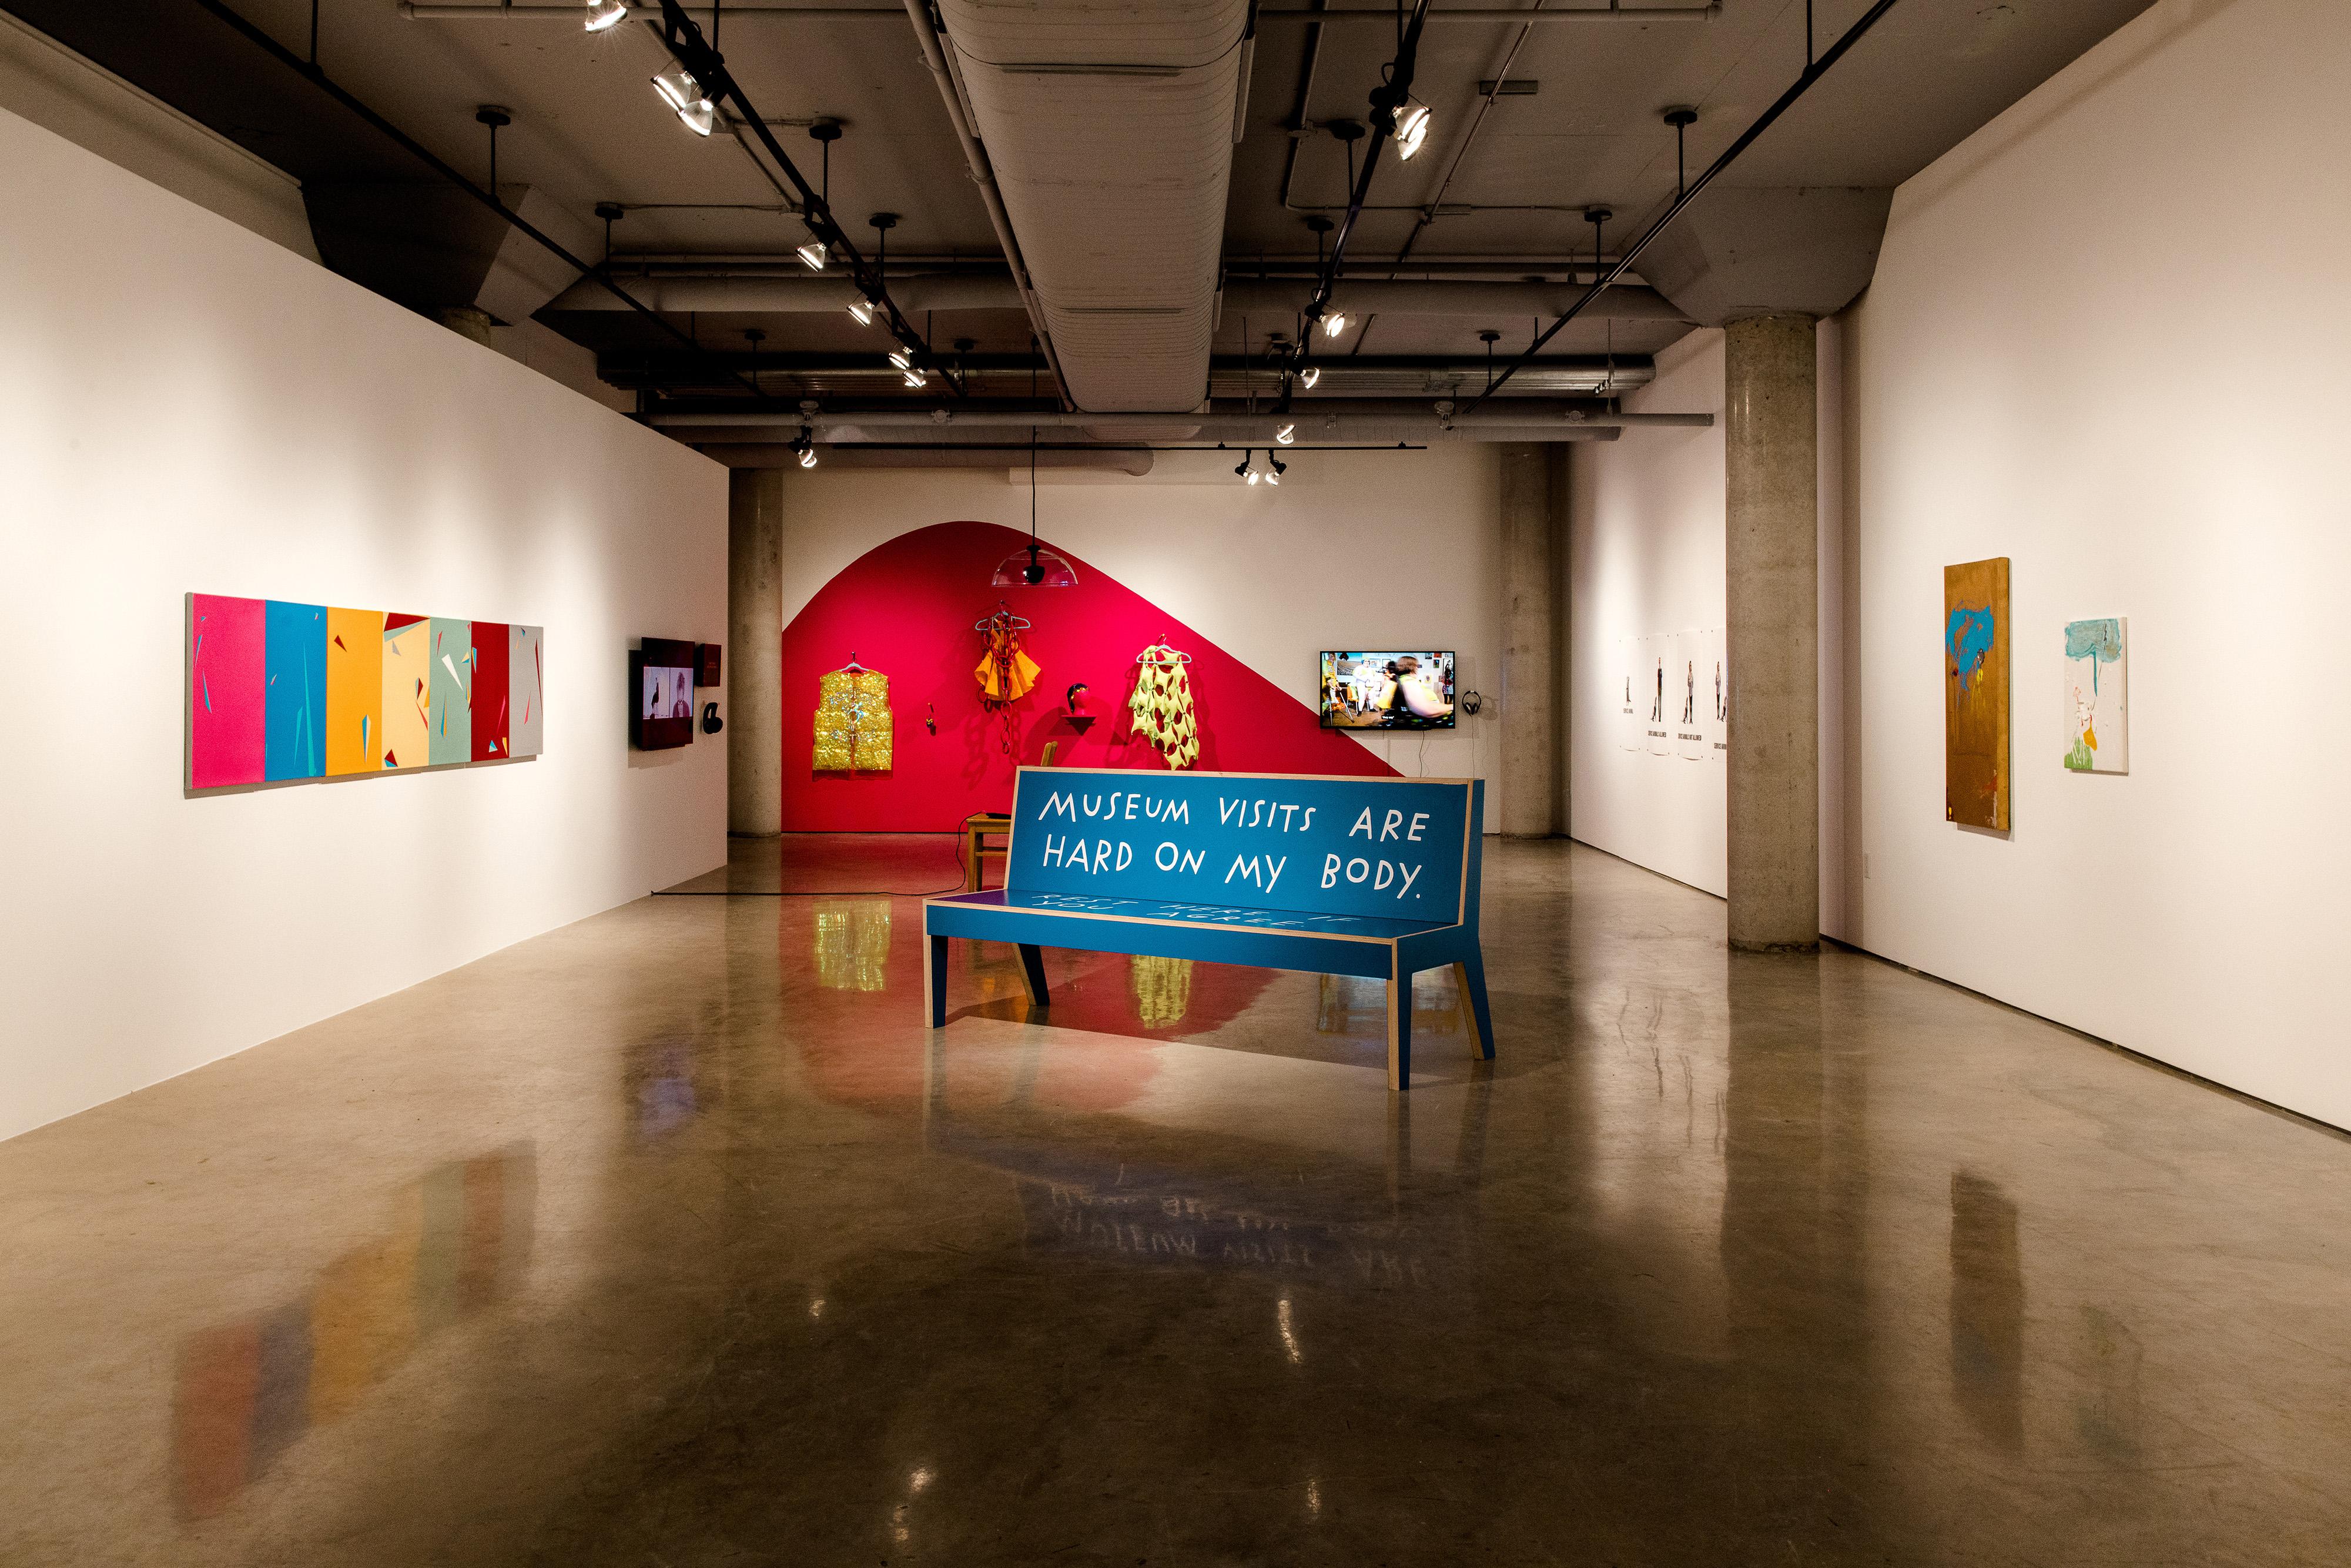 An image of the #CripRitual gallery at the Doris McCarthy Gallery. A blue bench sits in the middle reading "MUSEUM VISITS ARE HARD ON MY BODY"